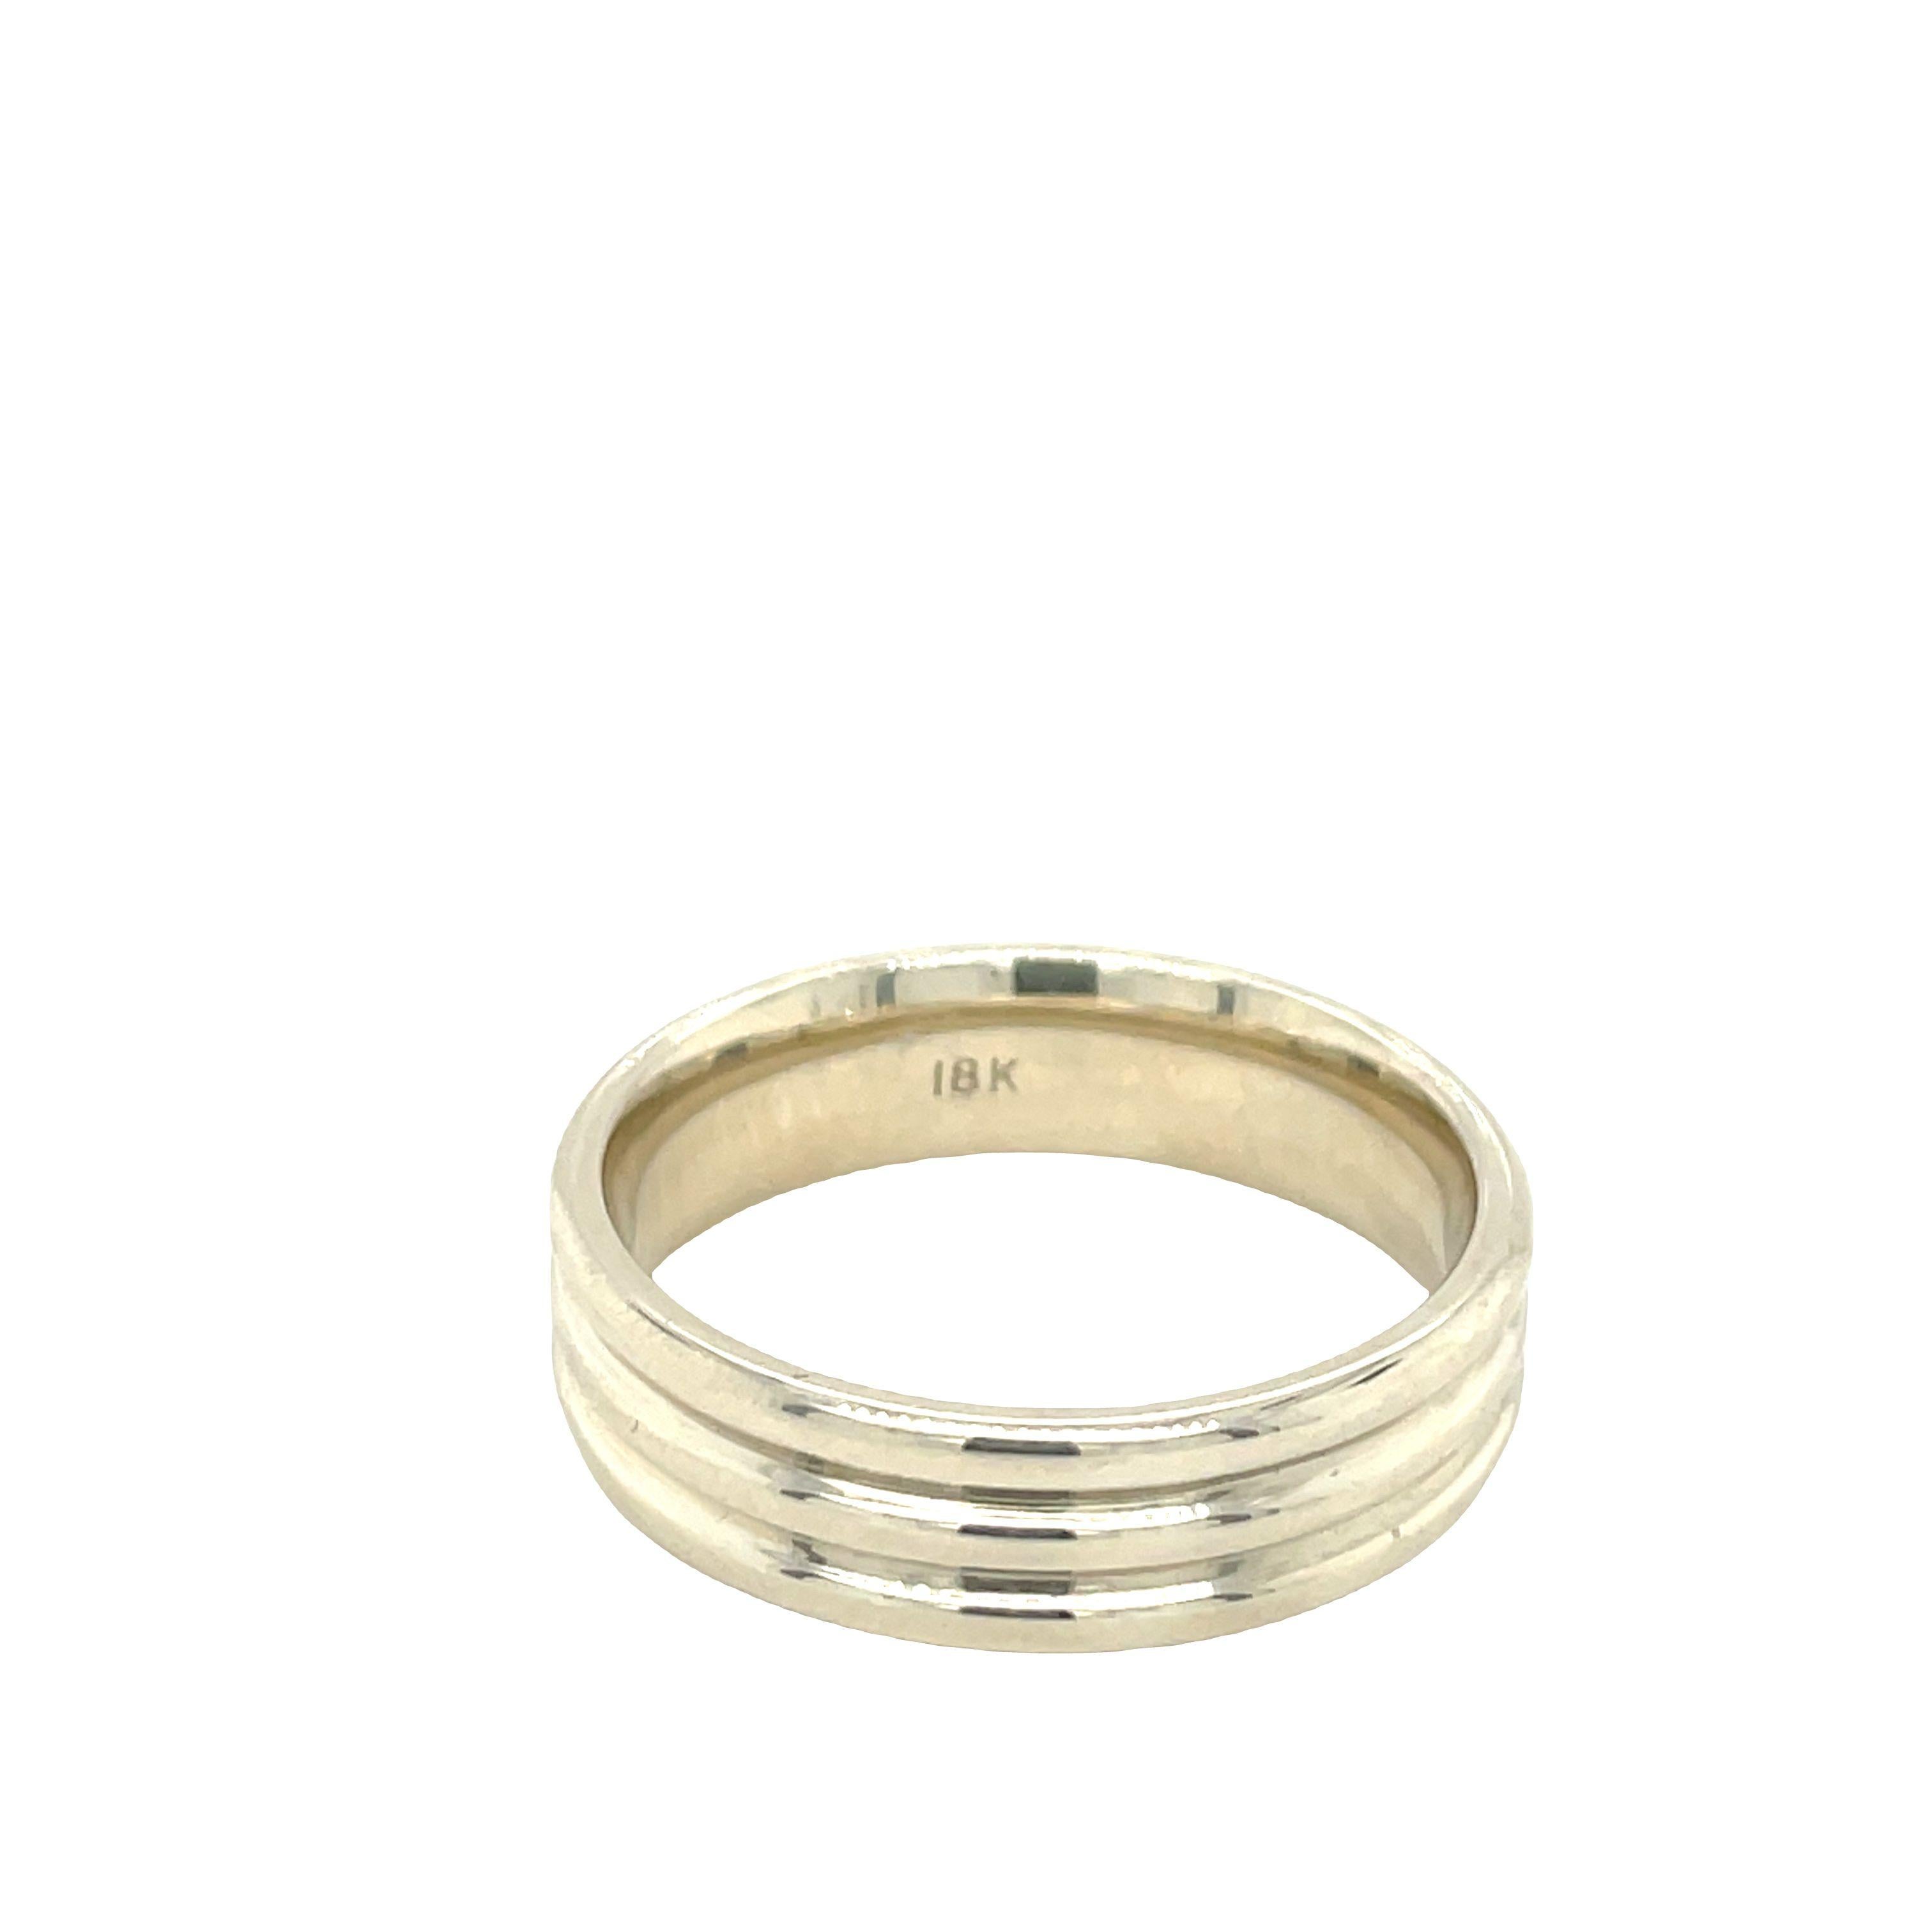 Crafted from 18K white gold, this sophisticated wedding band boasts a contemporary aesthetic with two seamlessly integrated grooves along its outer rounded surface, lending it a sleek and modern profile. The band has been meticulously polished to